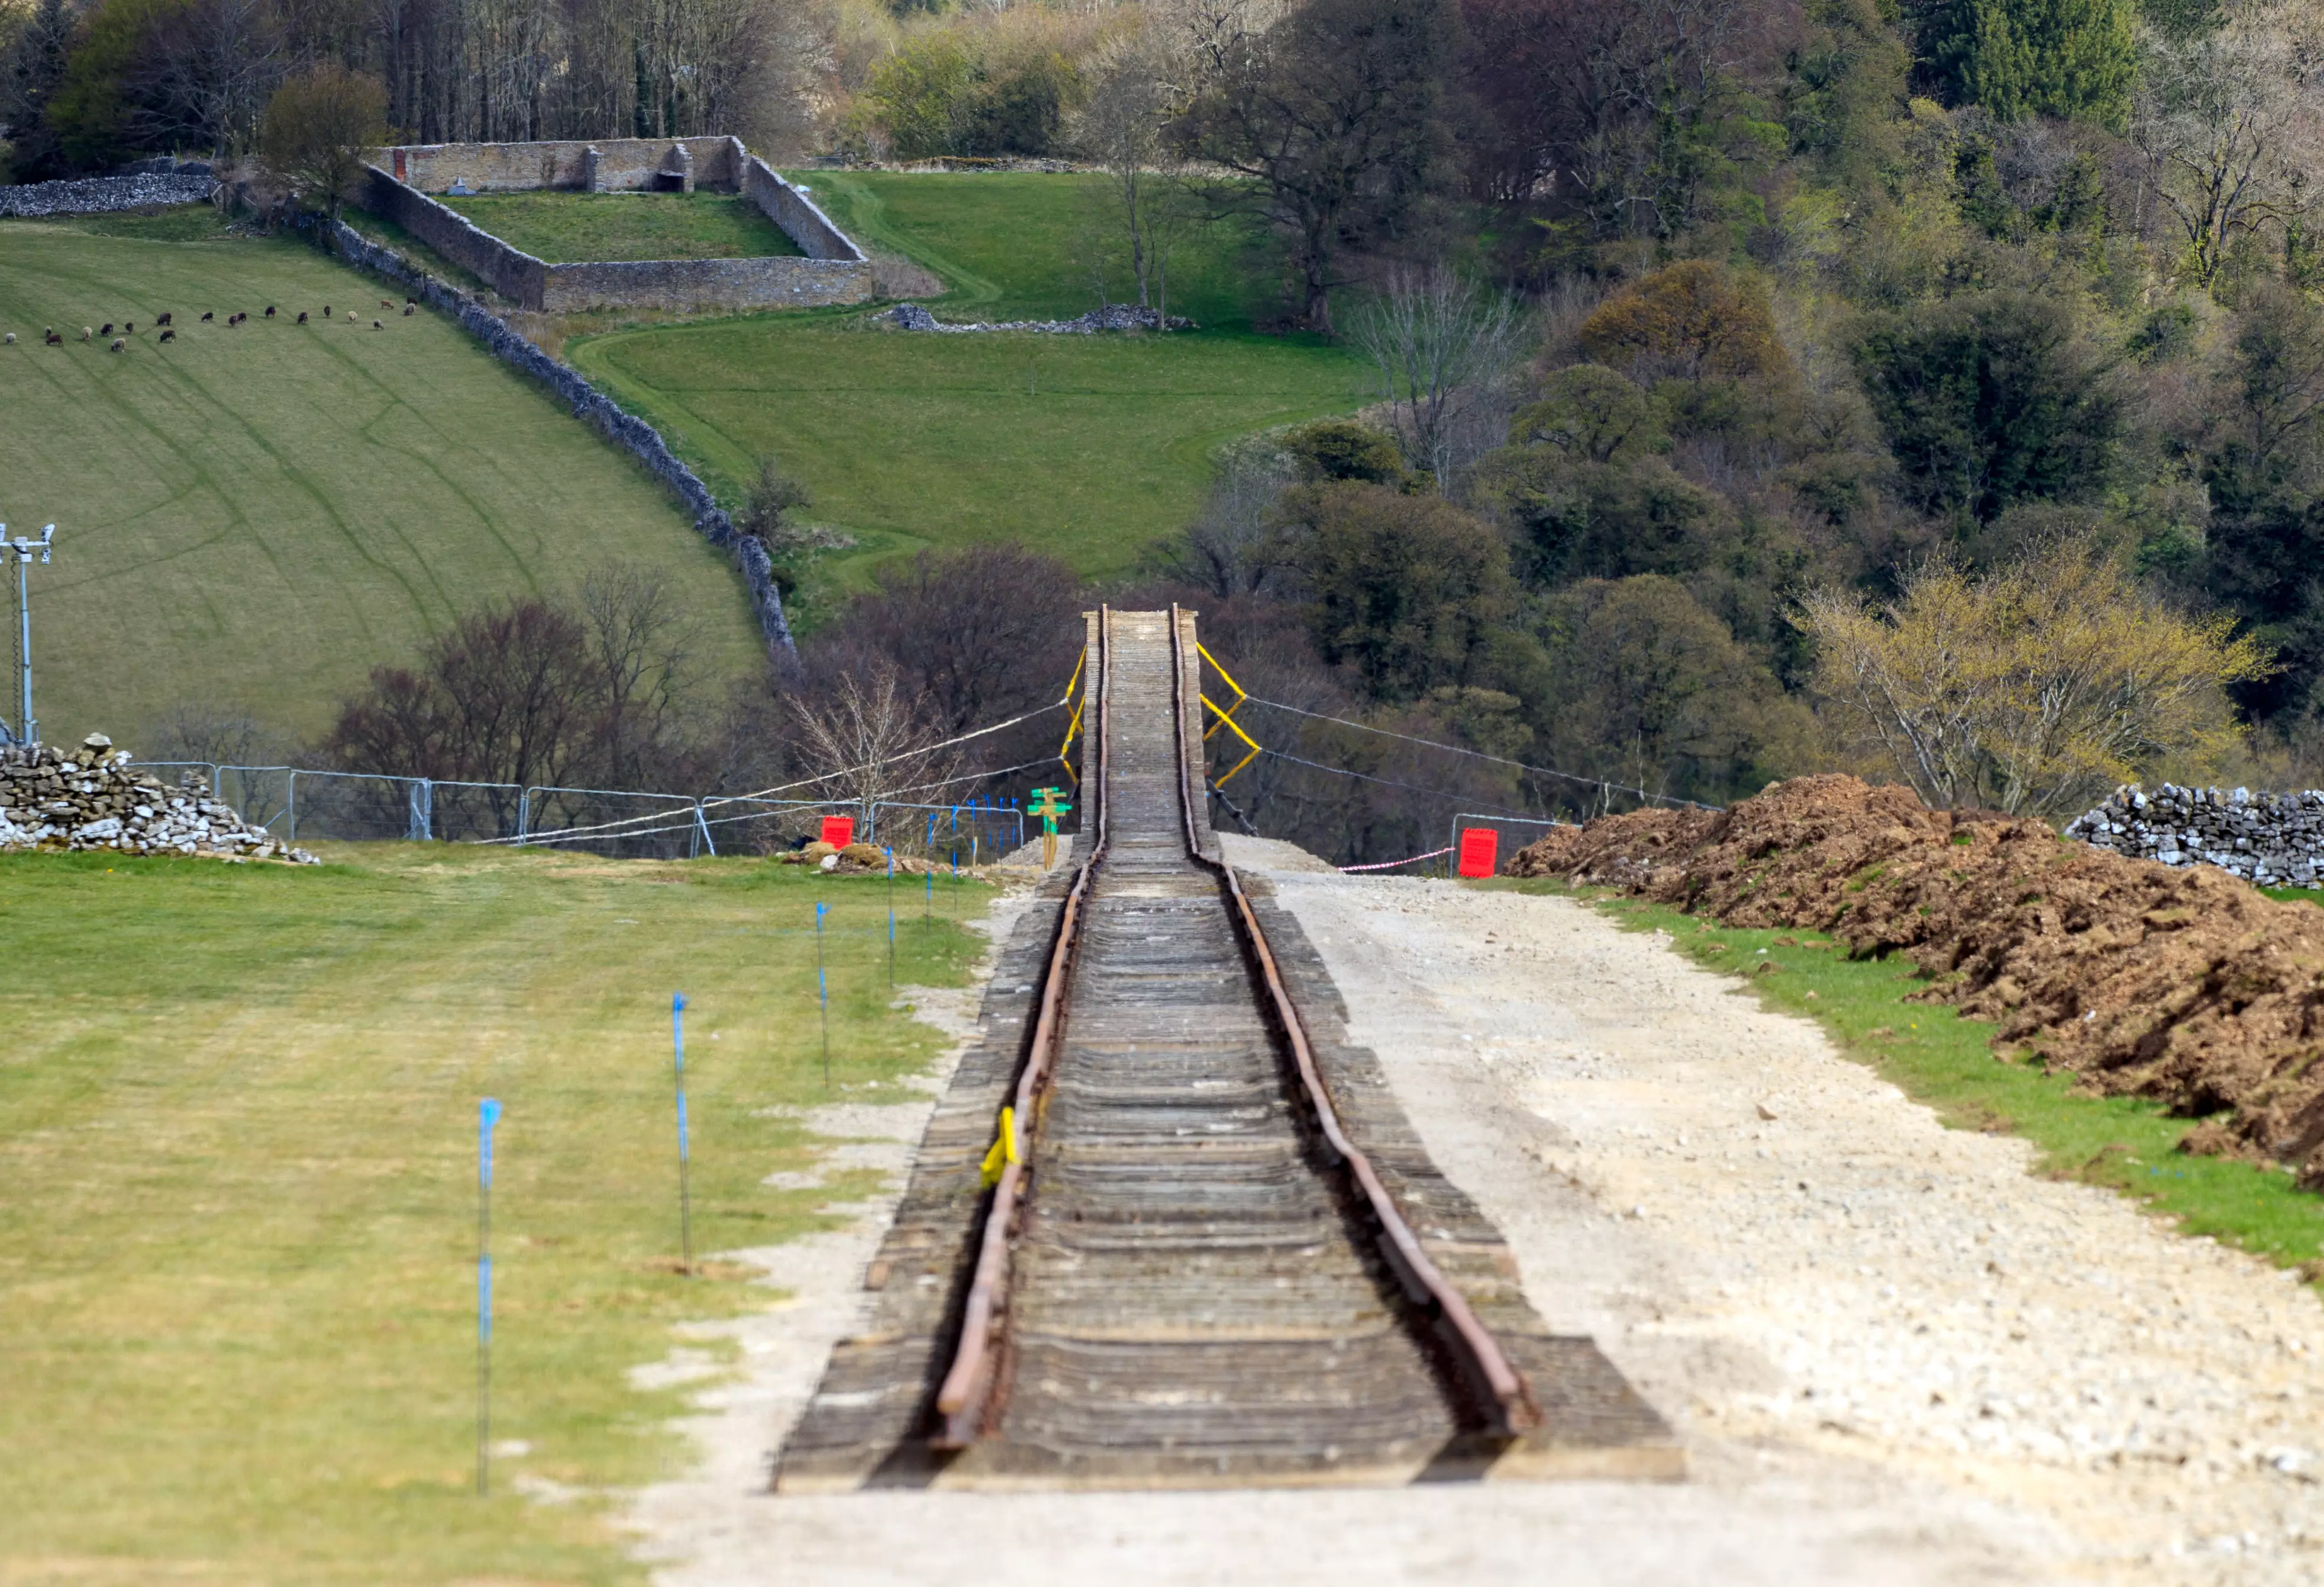 The train track in Stoney Middleton, Derbyshire for Tom Cruise's Mission: Impossible stunt. (